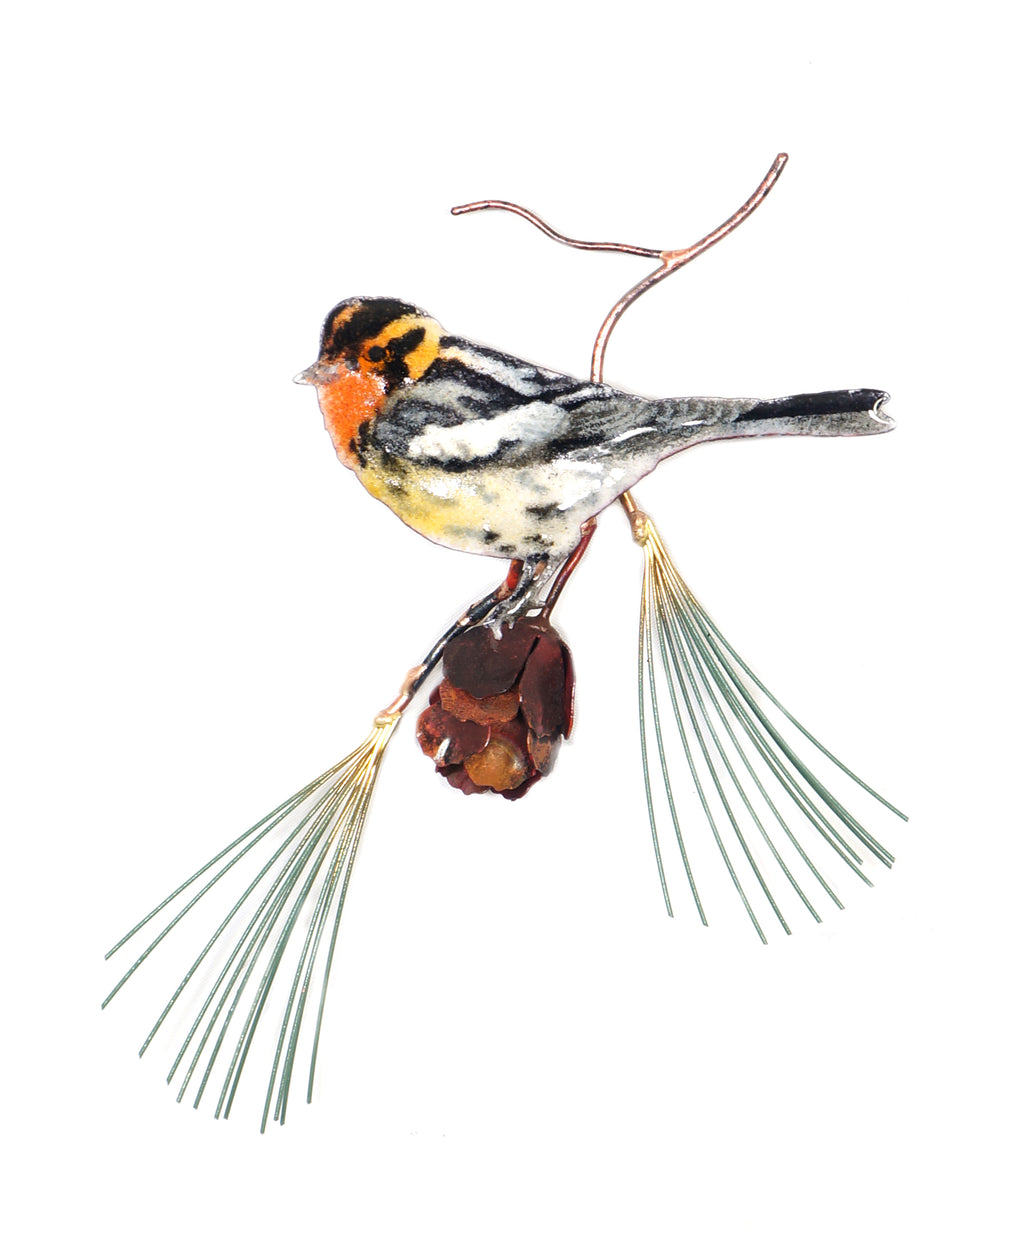 Blackburnian Warbler on Pine Wall Art by Bovano Cheshire